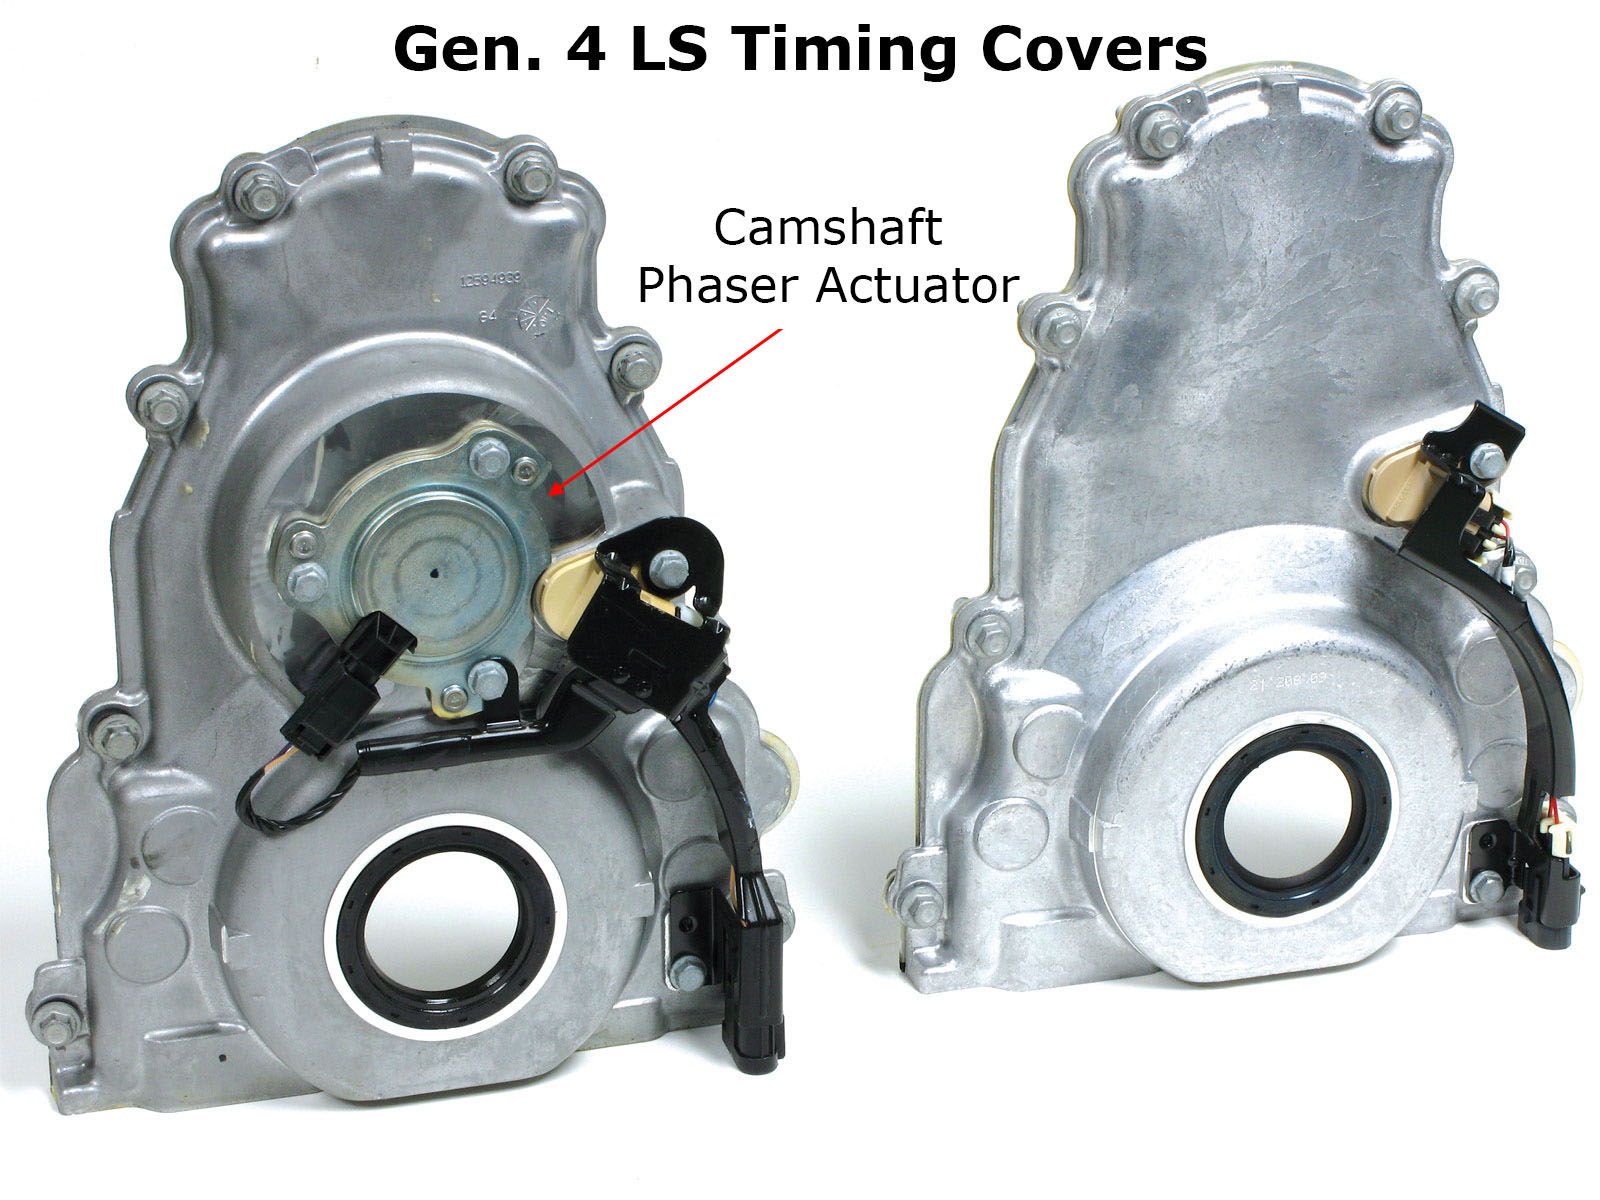 Gen. 4 LS Timing Covers (with and without VVT)